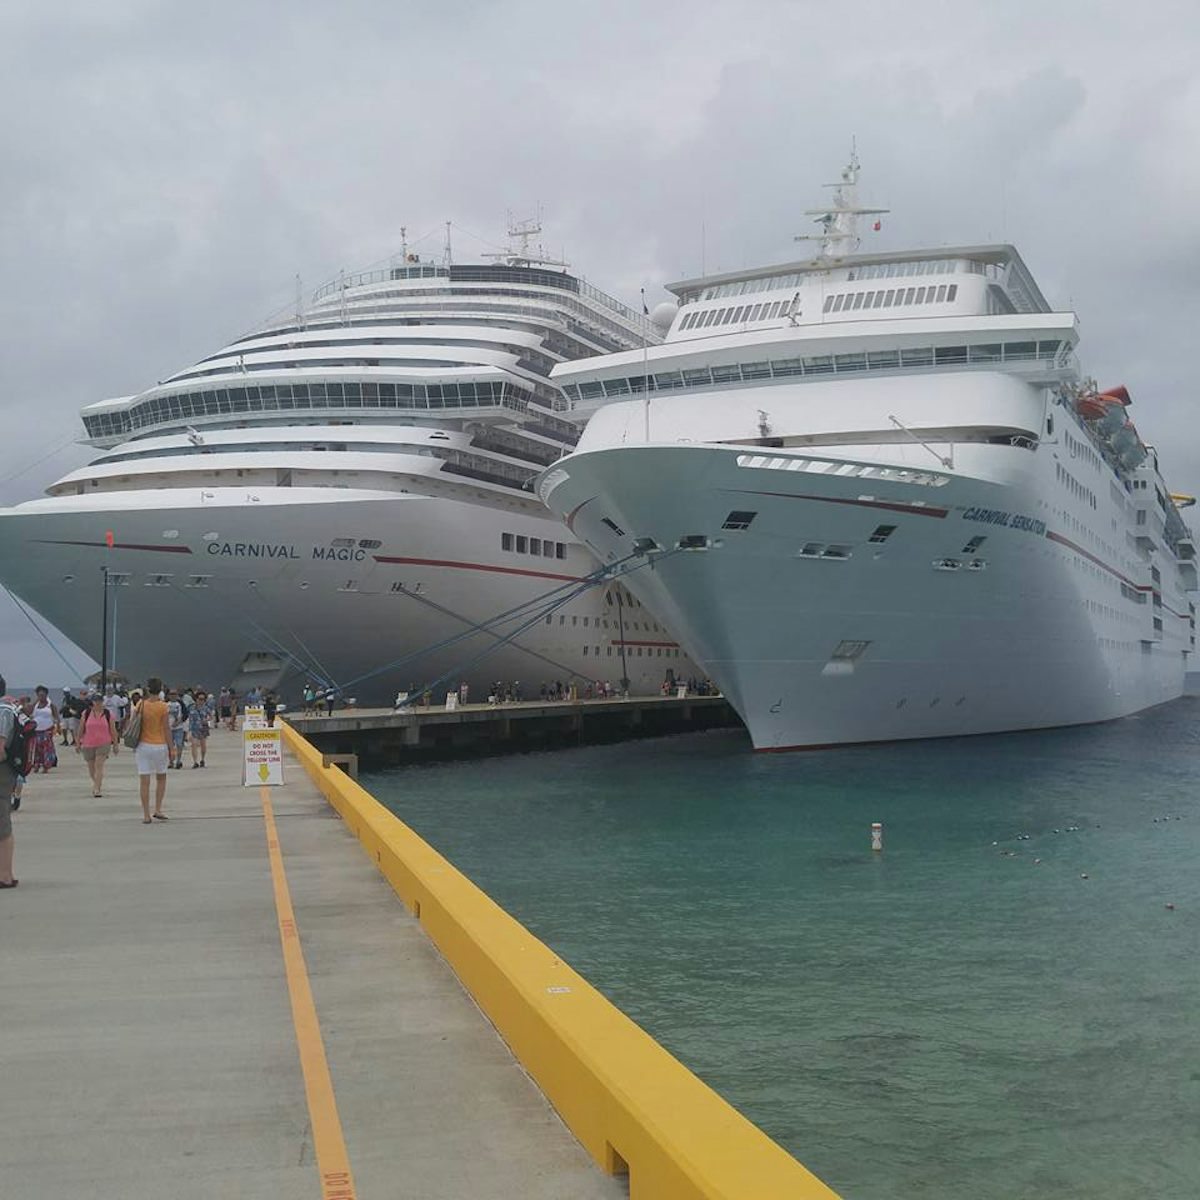 The Carnival Magic and the Carnival Sensation docked at Grand Turk.